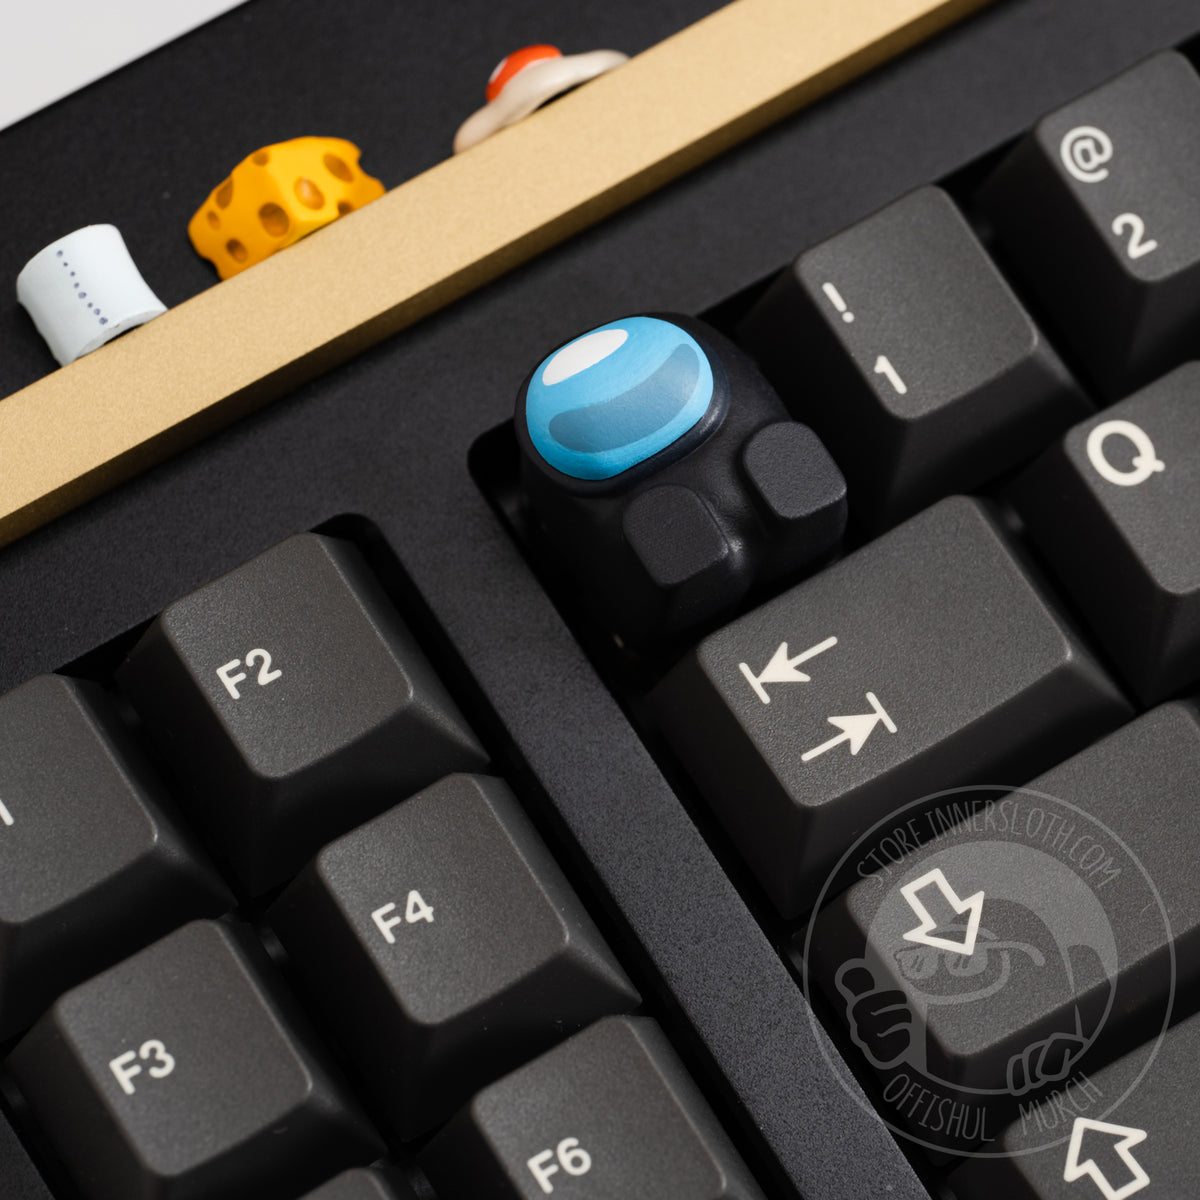 A product photo of the black keycap taking the place of the escape key on a black keyboard. 